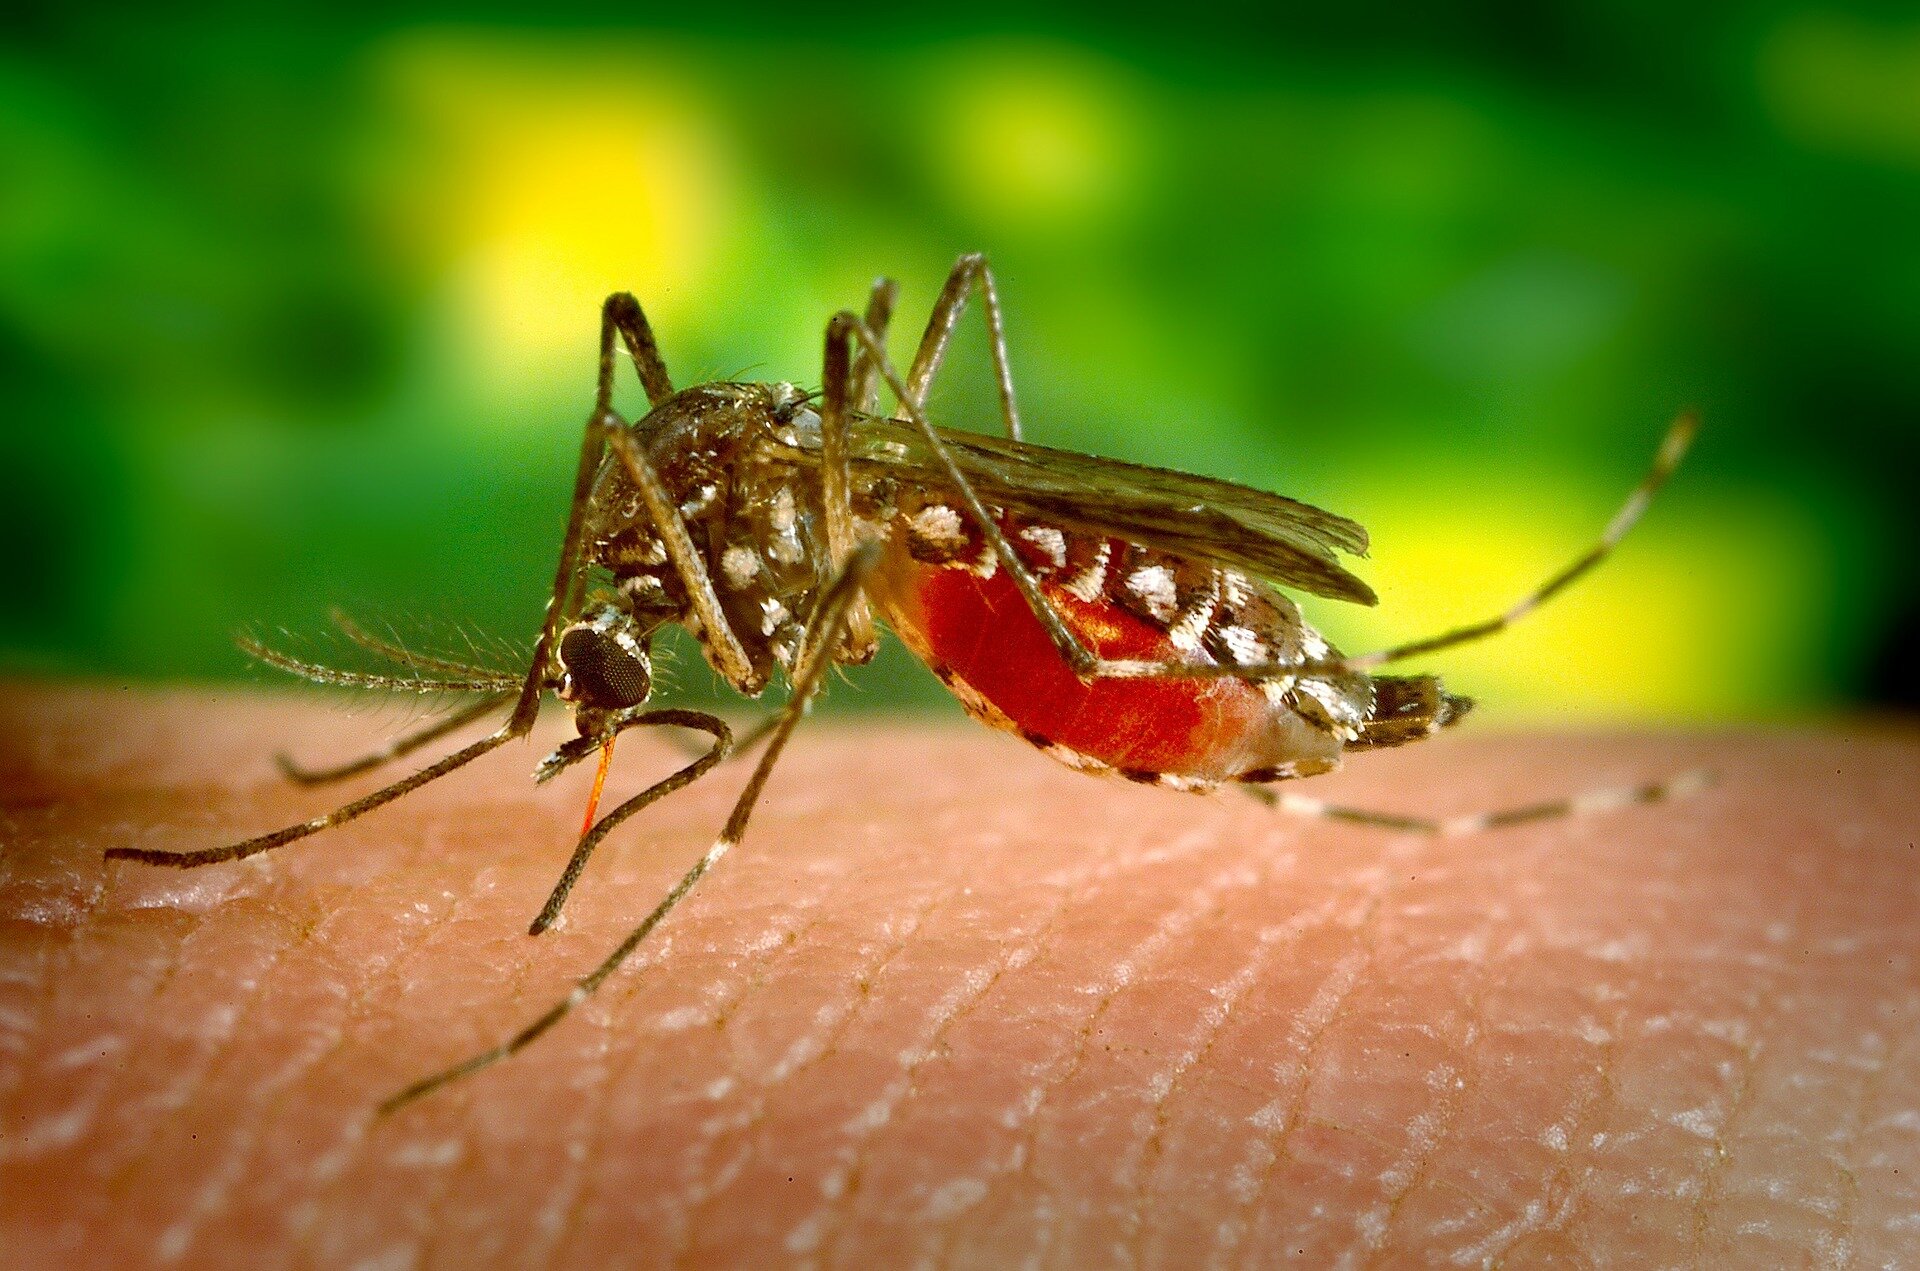 Human test subjects may no longer be needed for mosquito bite trials, thanks to invention of new biomaterial